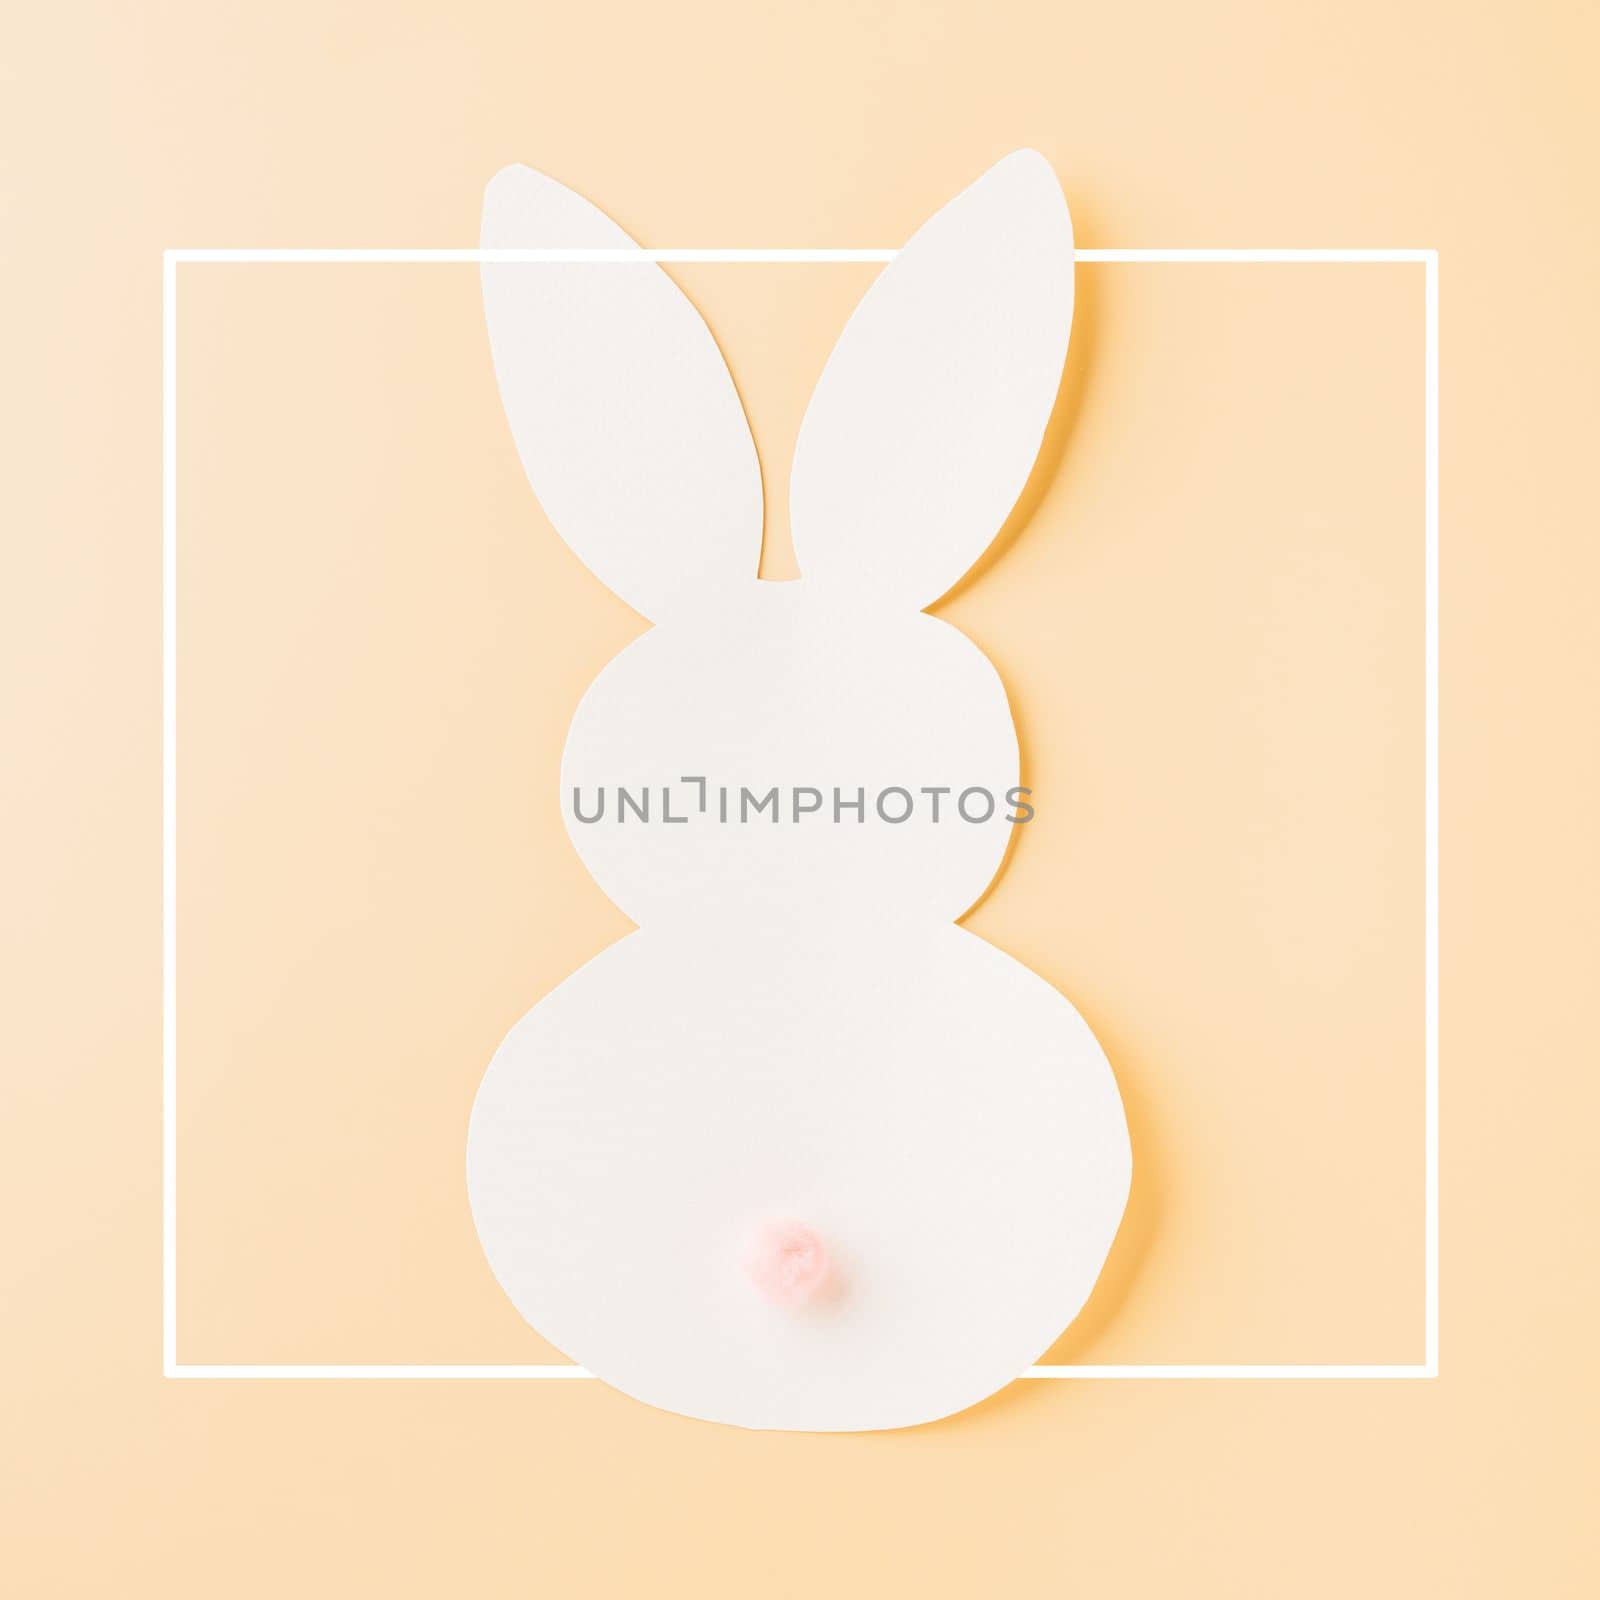 Easter Day Concept. Above overhead handmade white paper rabbit cutting isolated on pastel background with copy space for your text, Happy Easter Bunny holiday, Banner design for web